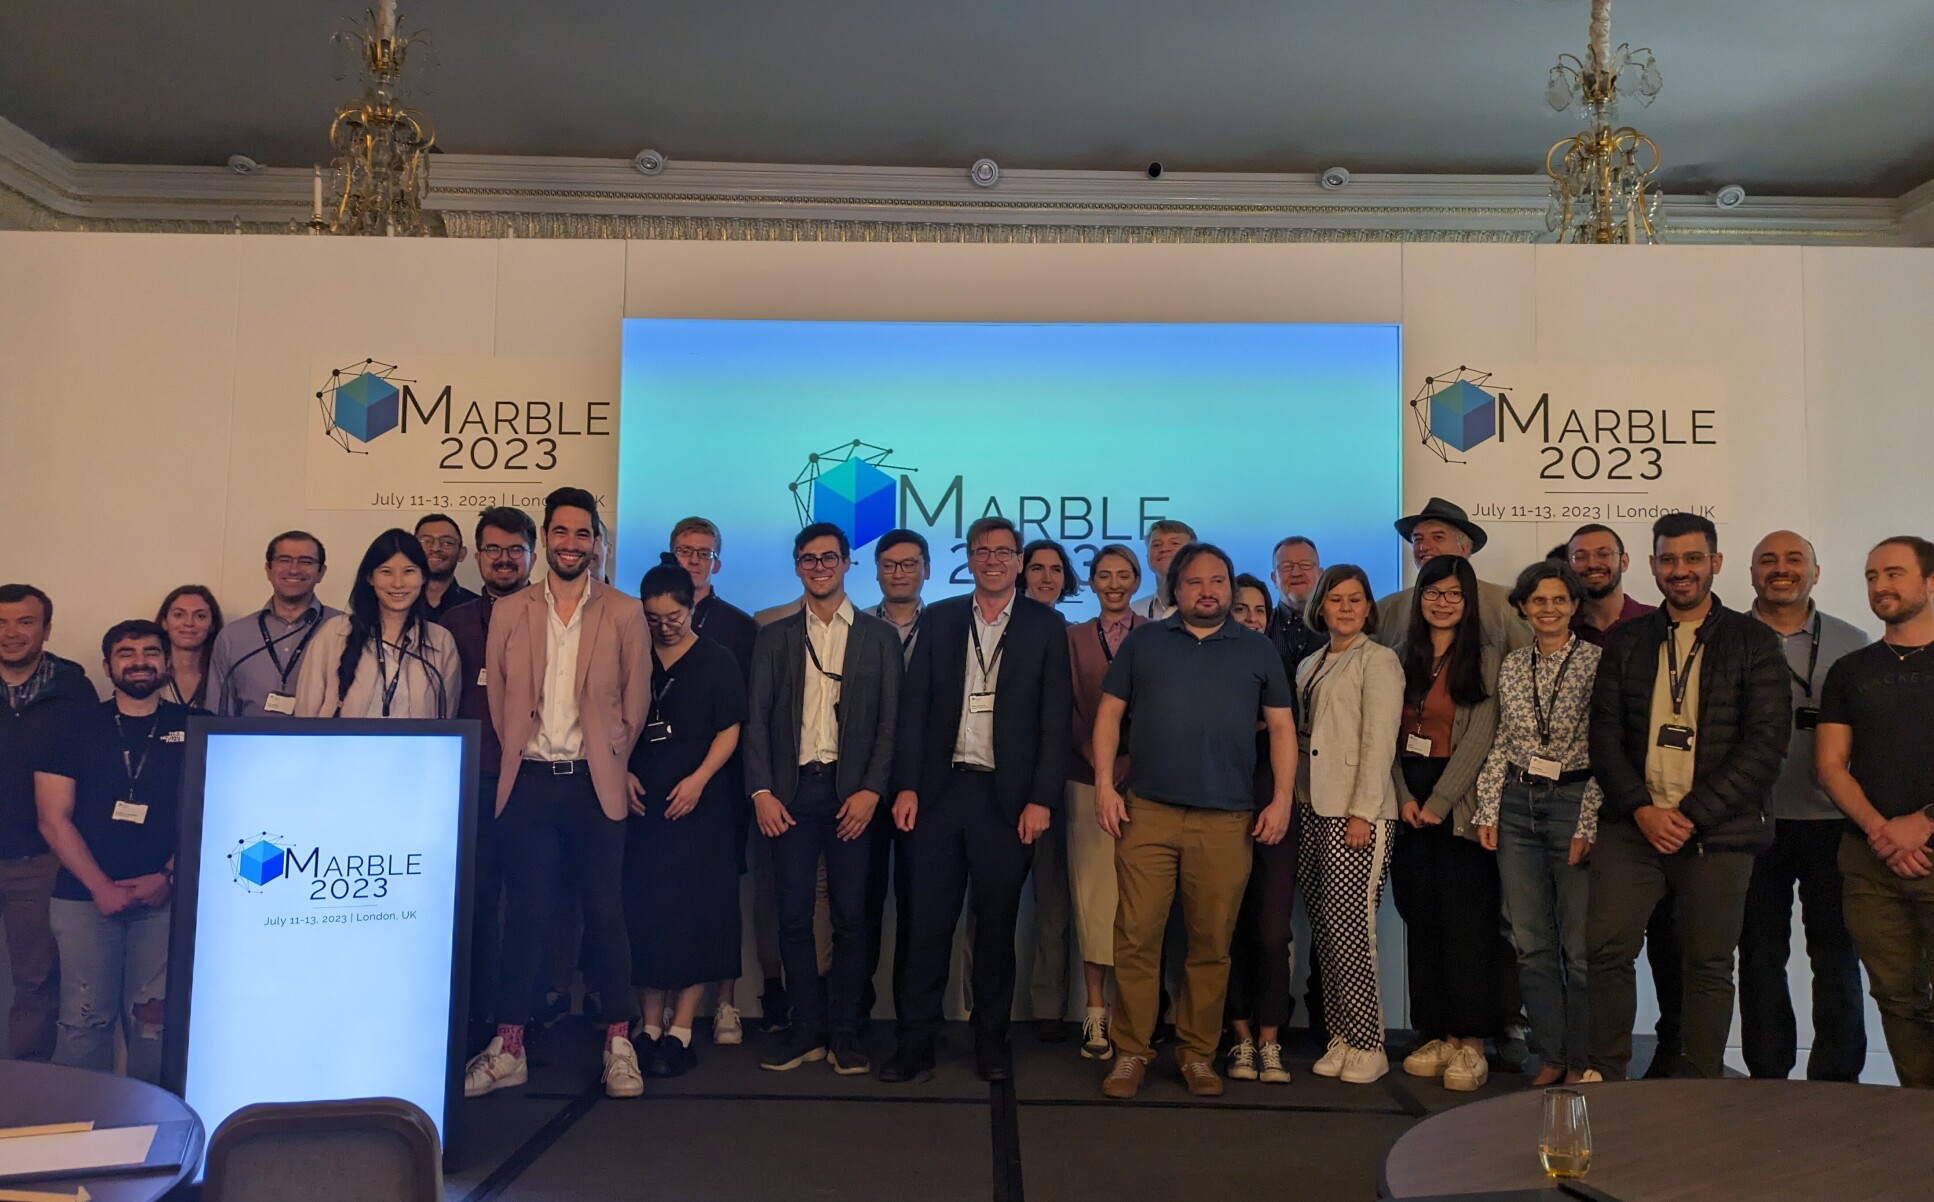 Attendees at the MARBLE Conference 2023